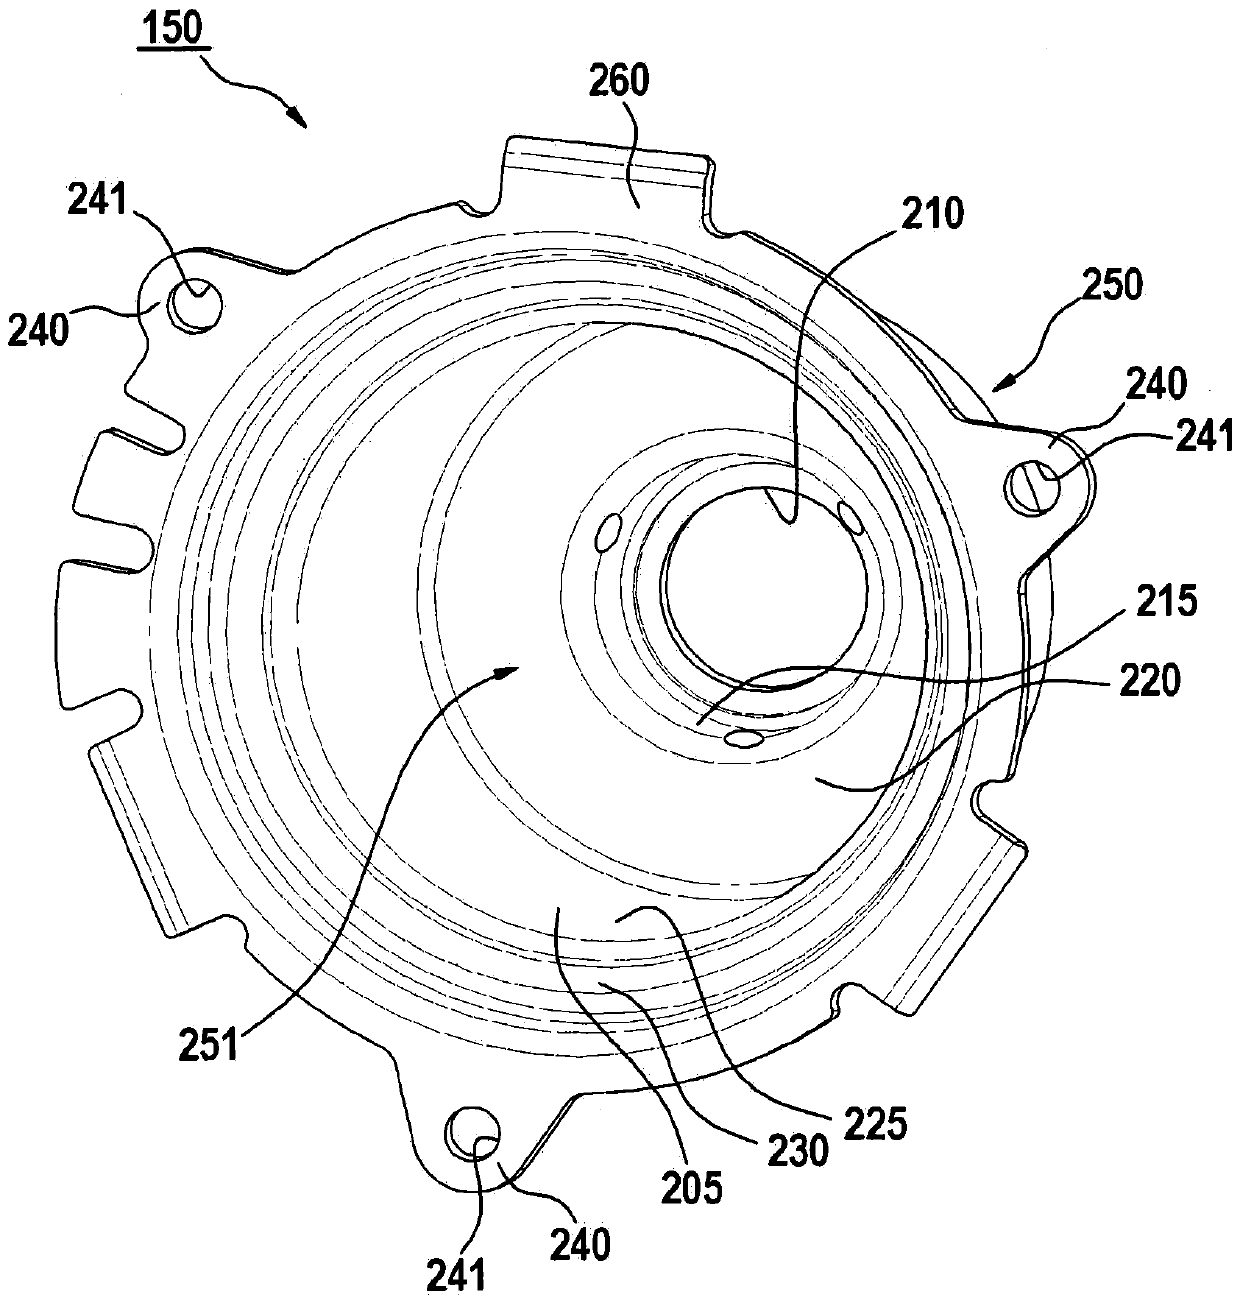 Electric motor with segmented stator